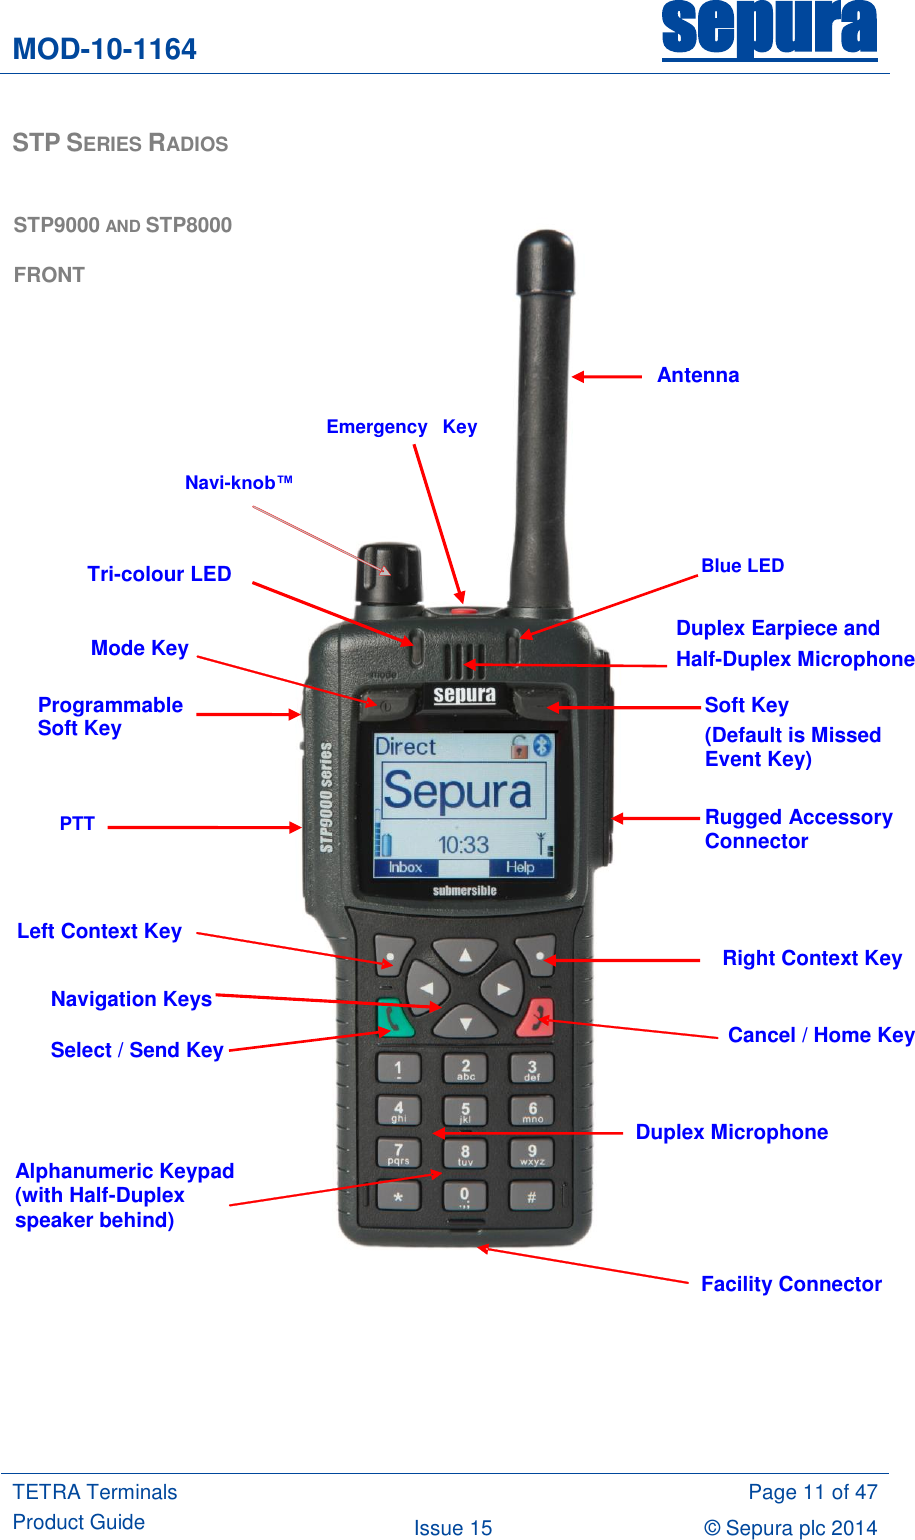 MOD-10-1164 sepura  TETRA Terminals Product Guide  Page 11 of 47 Issue 15 © Sepura plc 2014   STP SERIES RADIOS         -  Navi-knob™  Mode Key PTT  Navigation Keys Select / Send Key Cancel / Home Key Alphanumeric Keypad (with Half-Duplex speaker behind) Facility Connector Duplex Microphone Left Context Key Programmable  Soft Key  Tri-colour LED Emergency   Key Duplex Earpiece and  Half-Duplex Microphone   Blue LED Right Context Key Soft Key (Default is Missed Event Key) Rugged Accessory Connector Antenna STP9000 AND STP8000 FRONT 